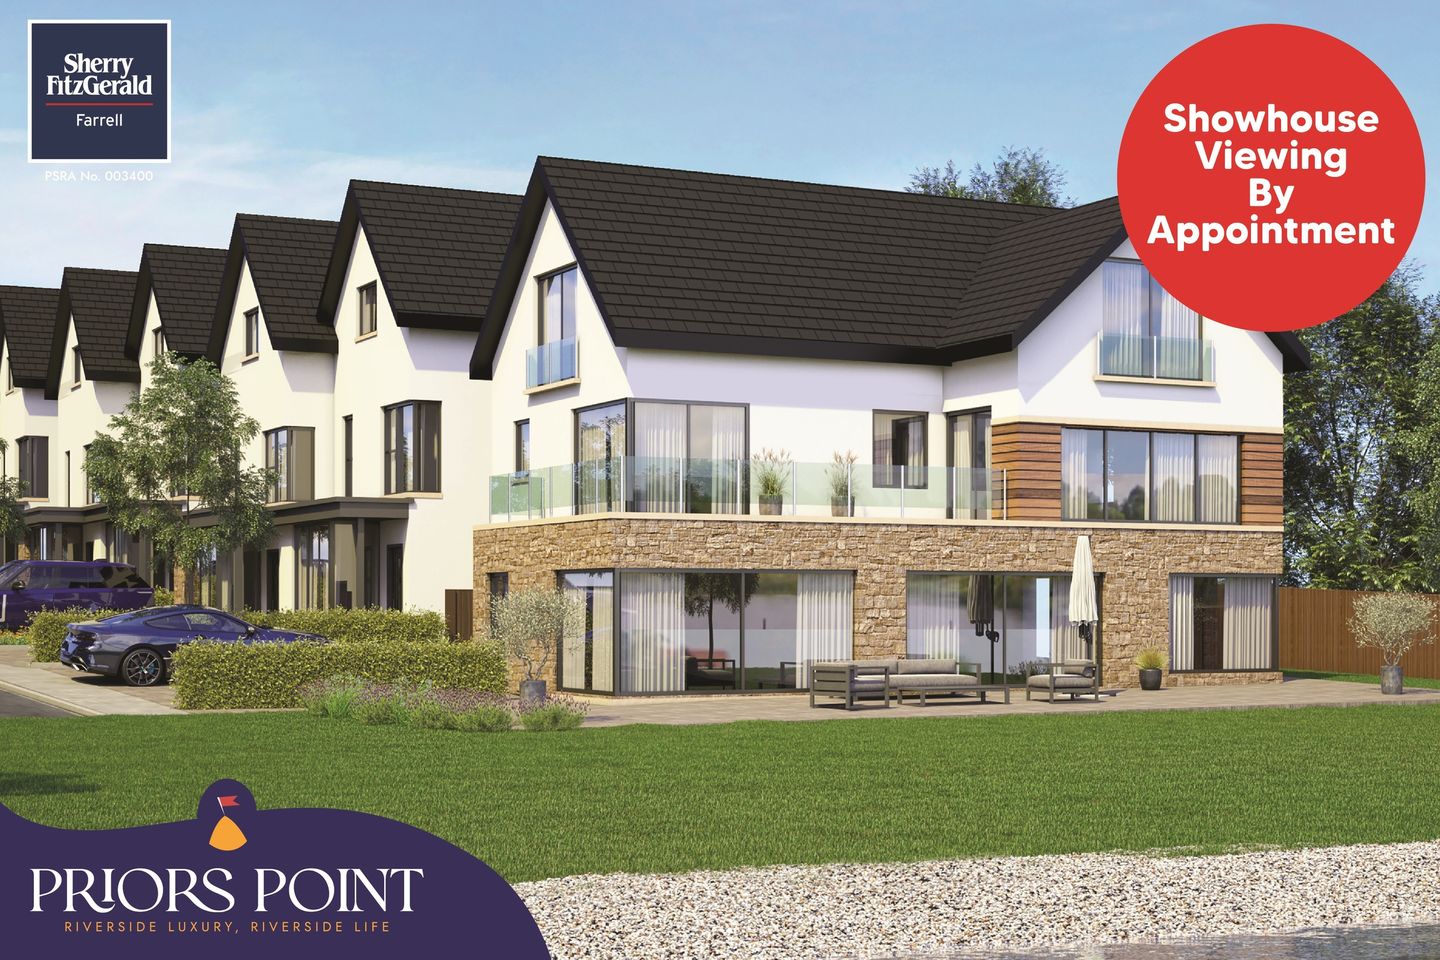 Type B - 4 Units Remaining, Priors Point, Priors Point, Attirory, Carrick-on-Shannon, Co. Leitrim